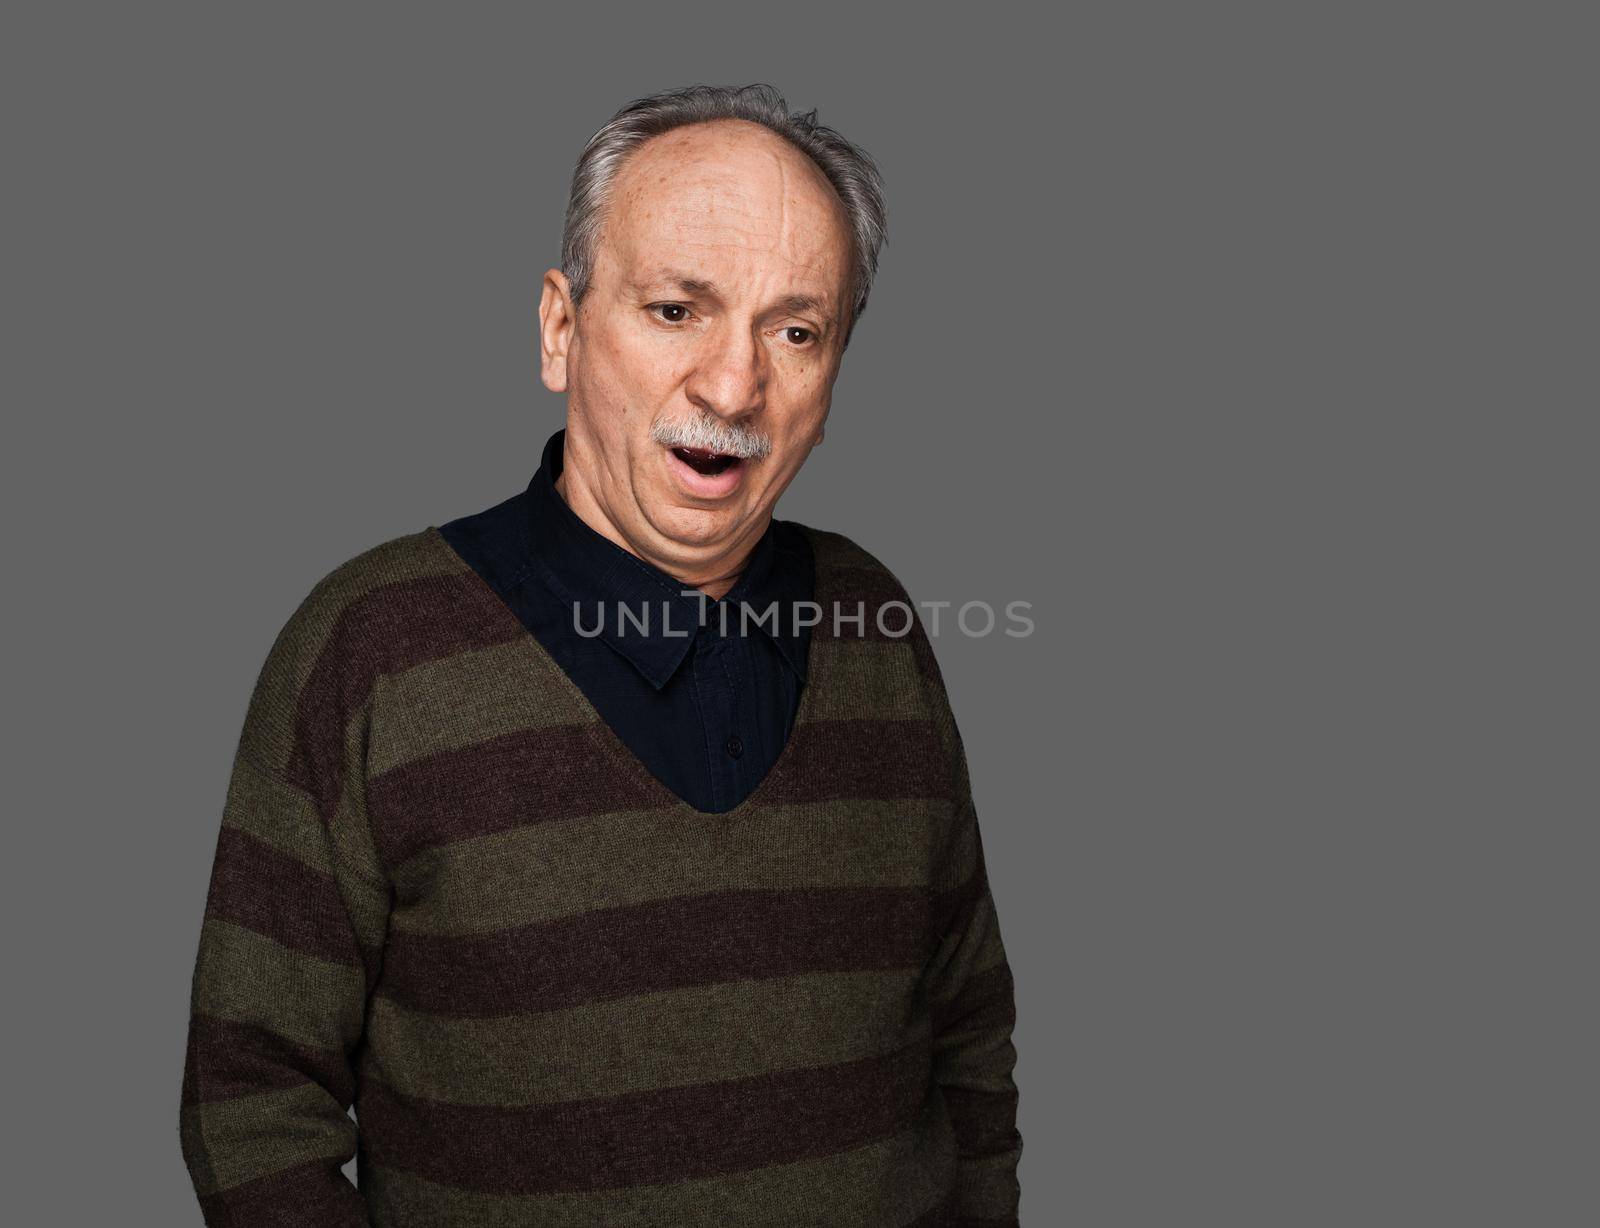 An old man in a sweater yawns. Studio portrait on a gray background